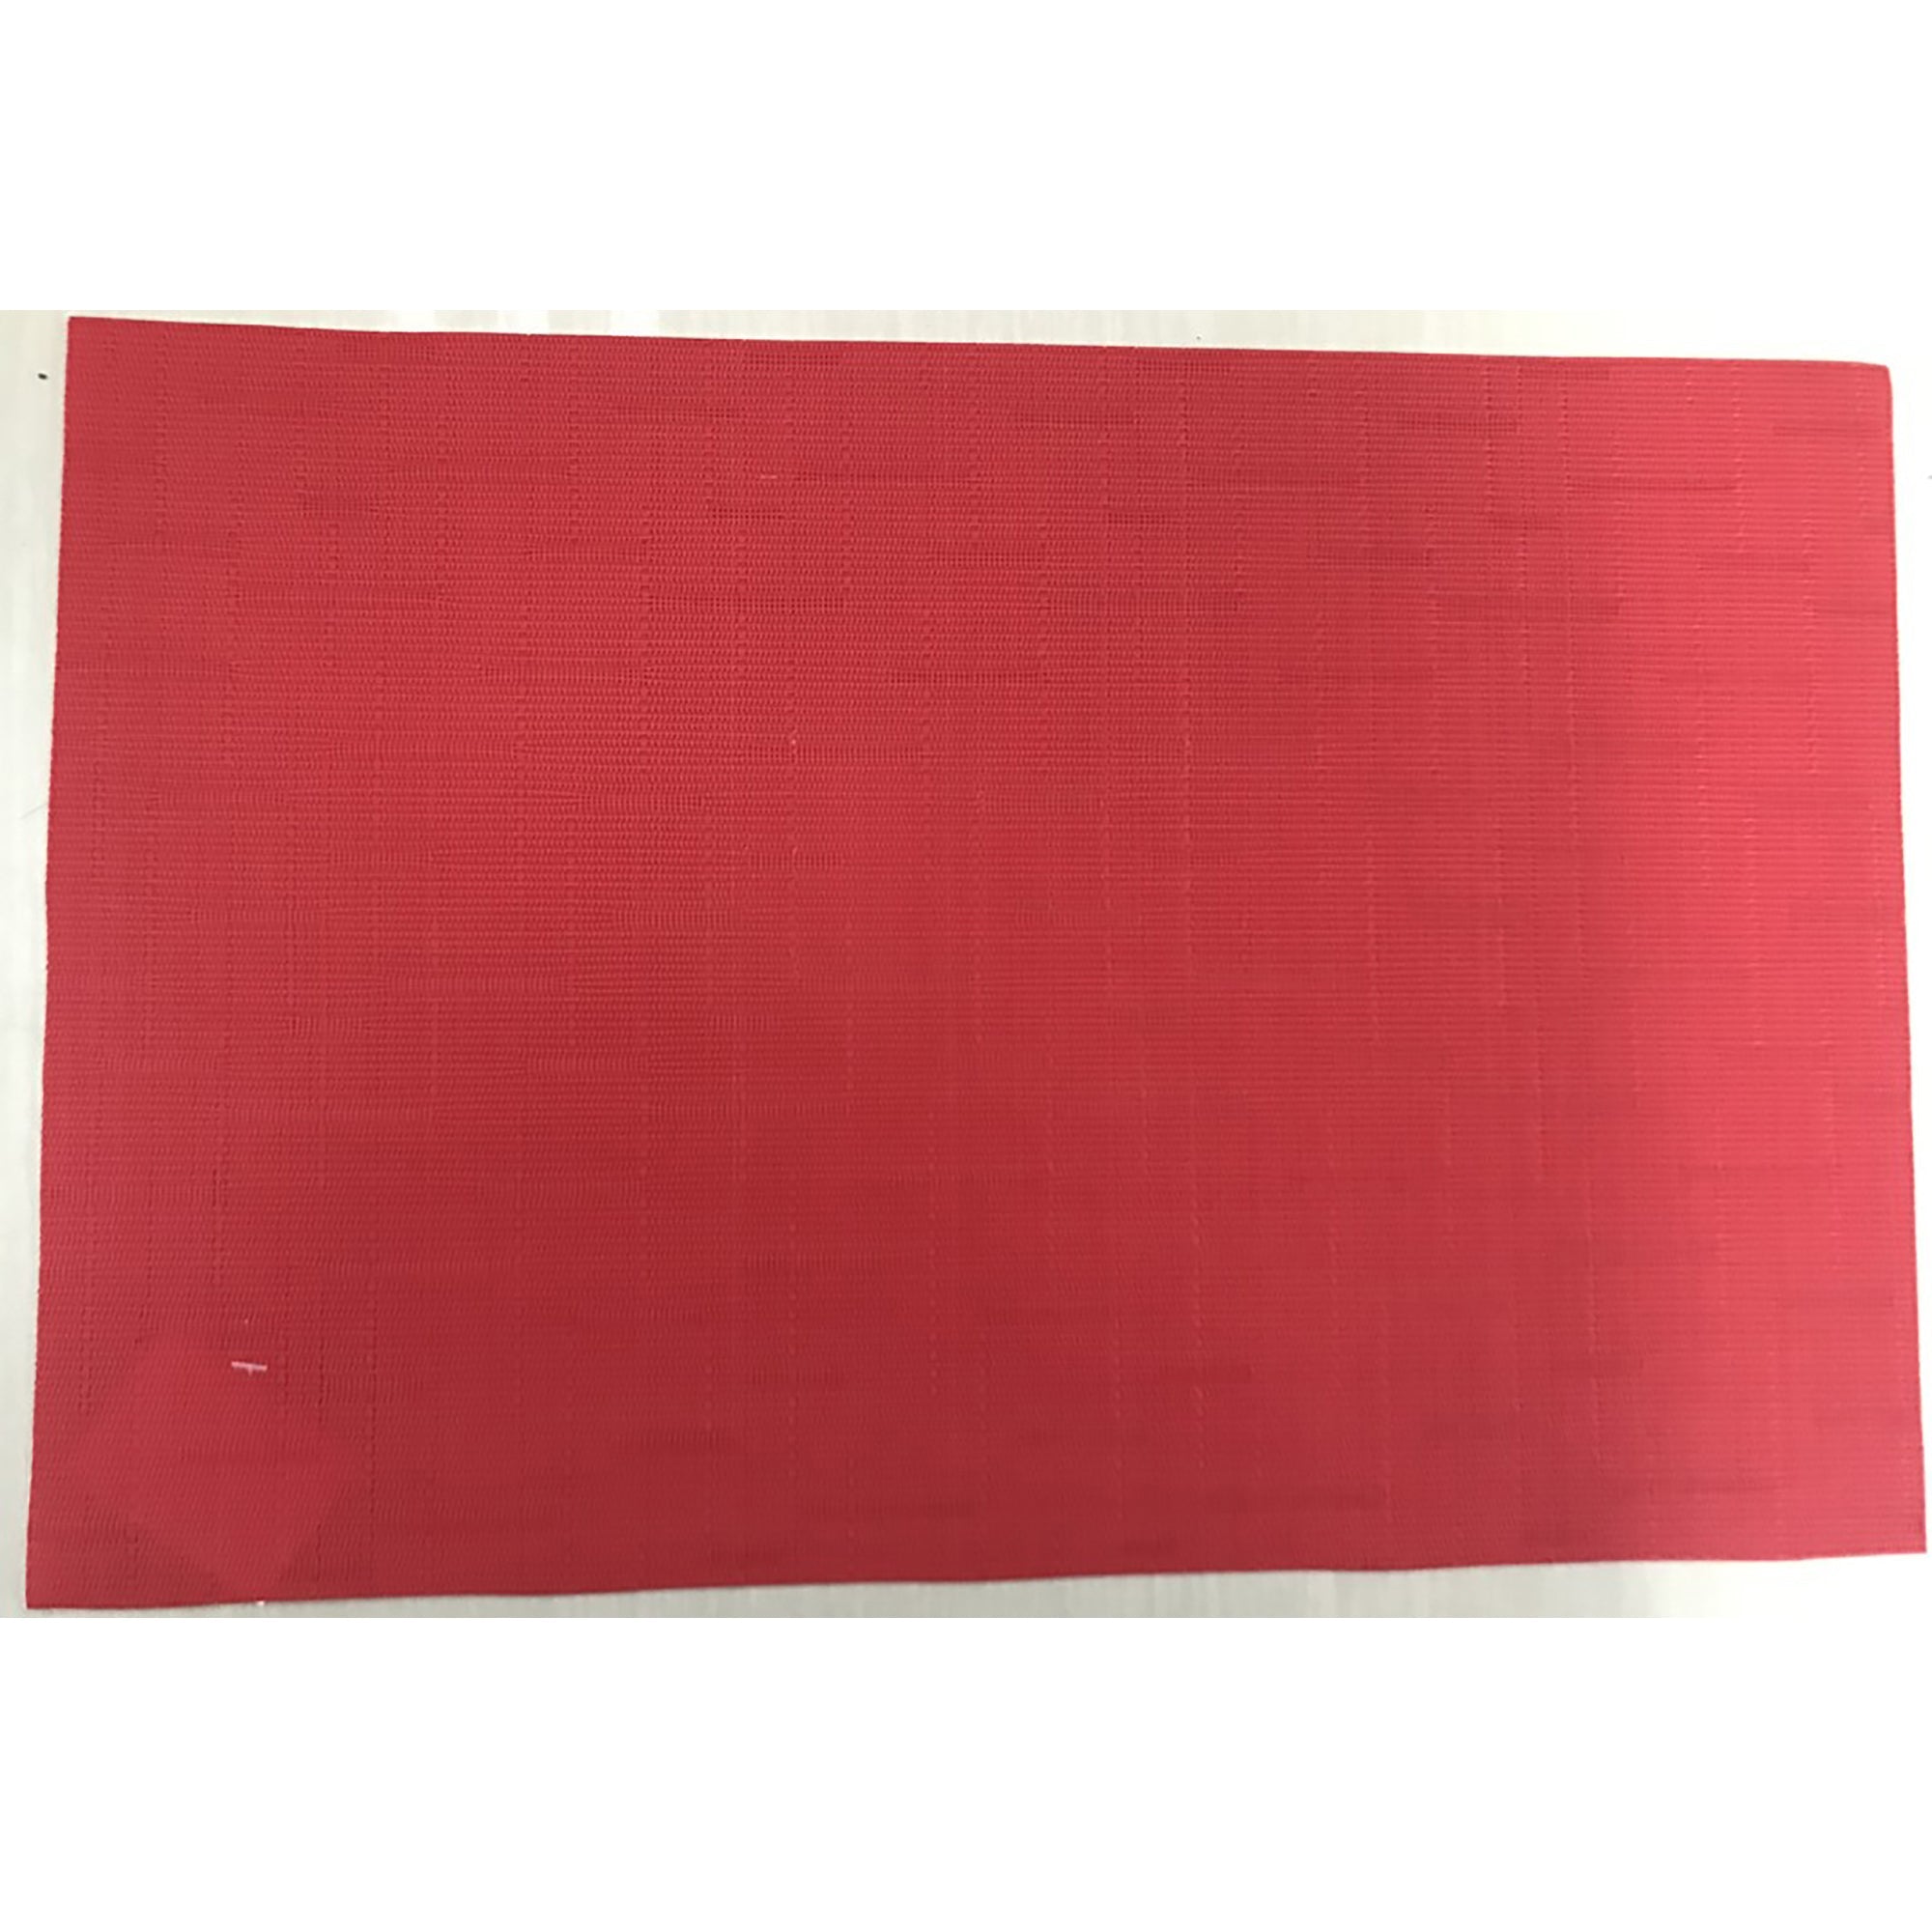 Red Textaline Placemat 17.5x12in